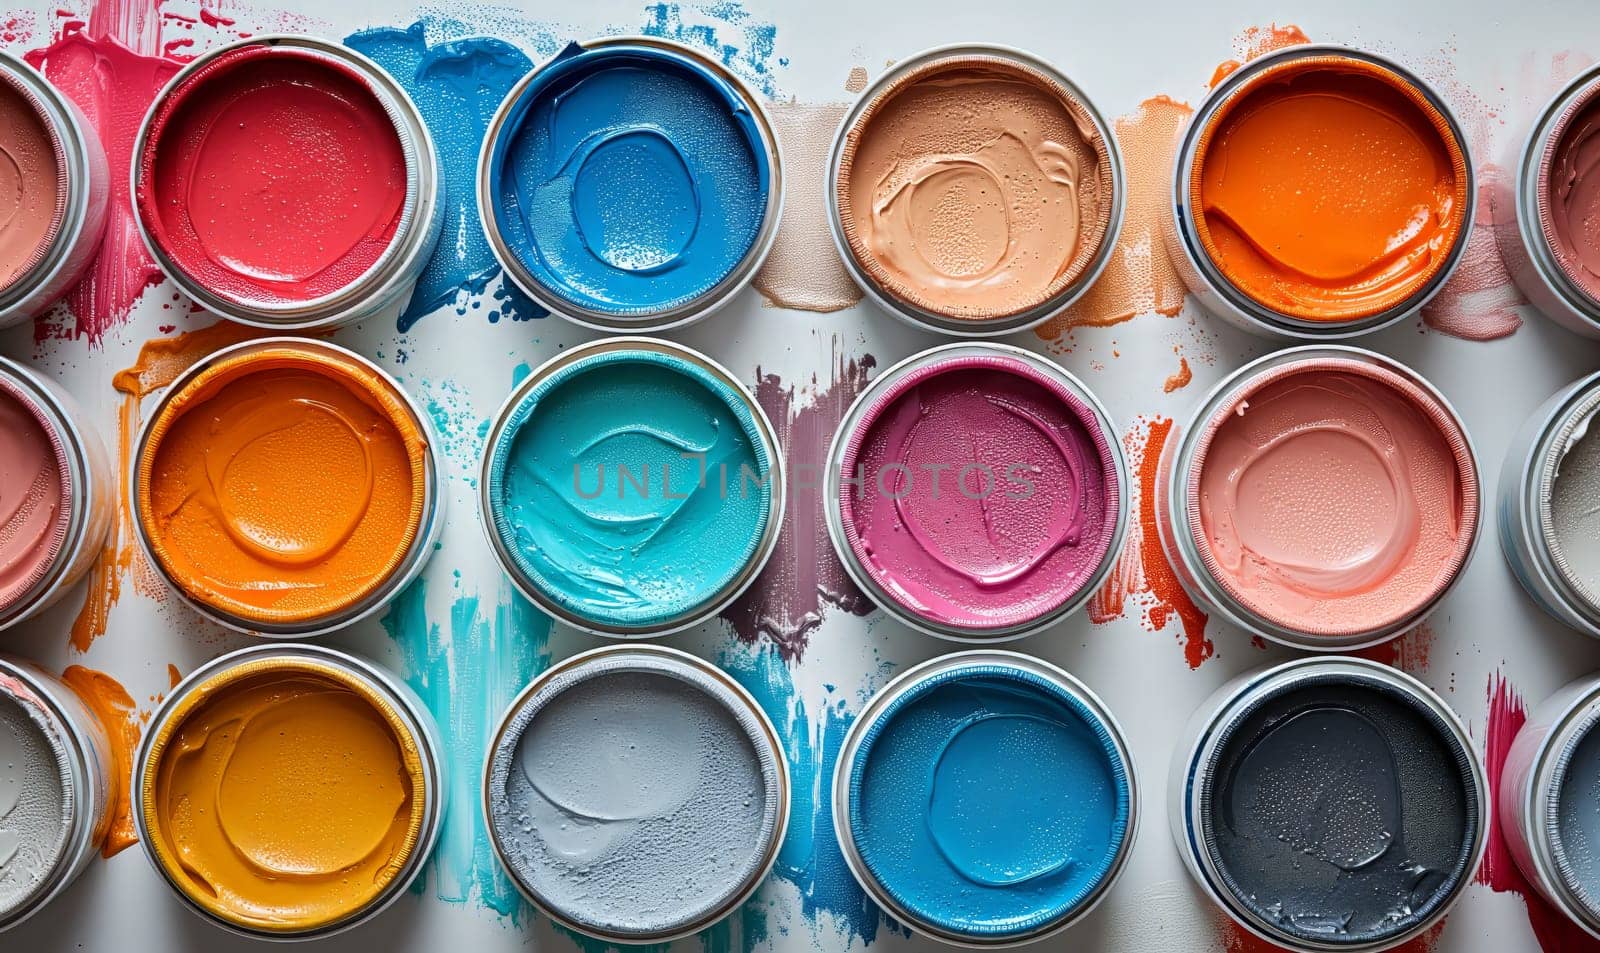 Cans of paint on a white background. by Fischeron